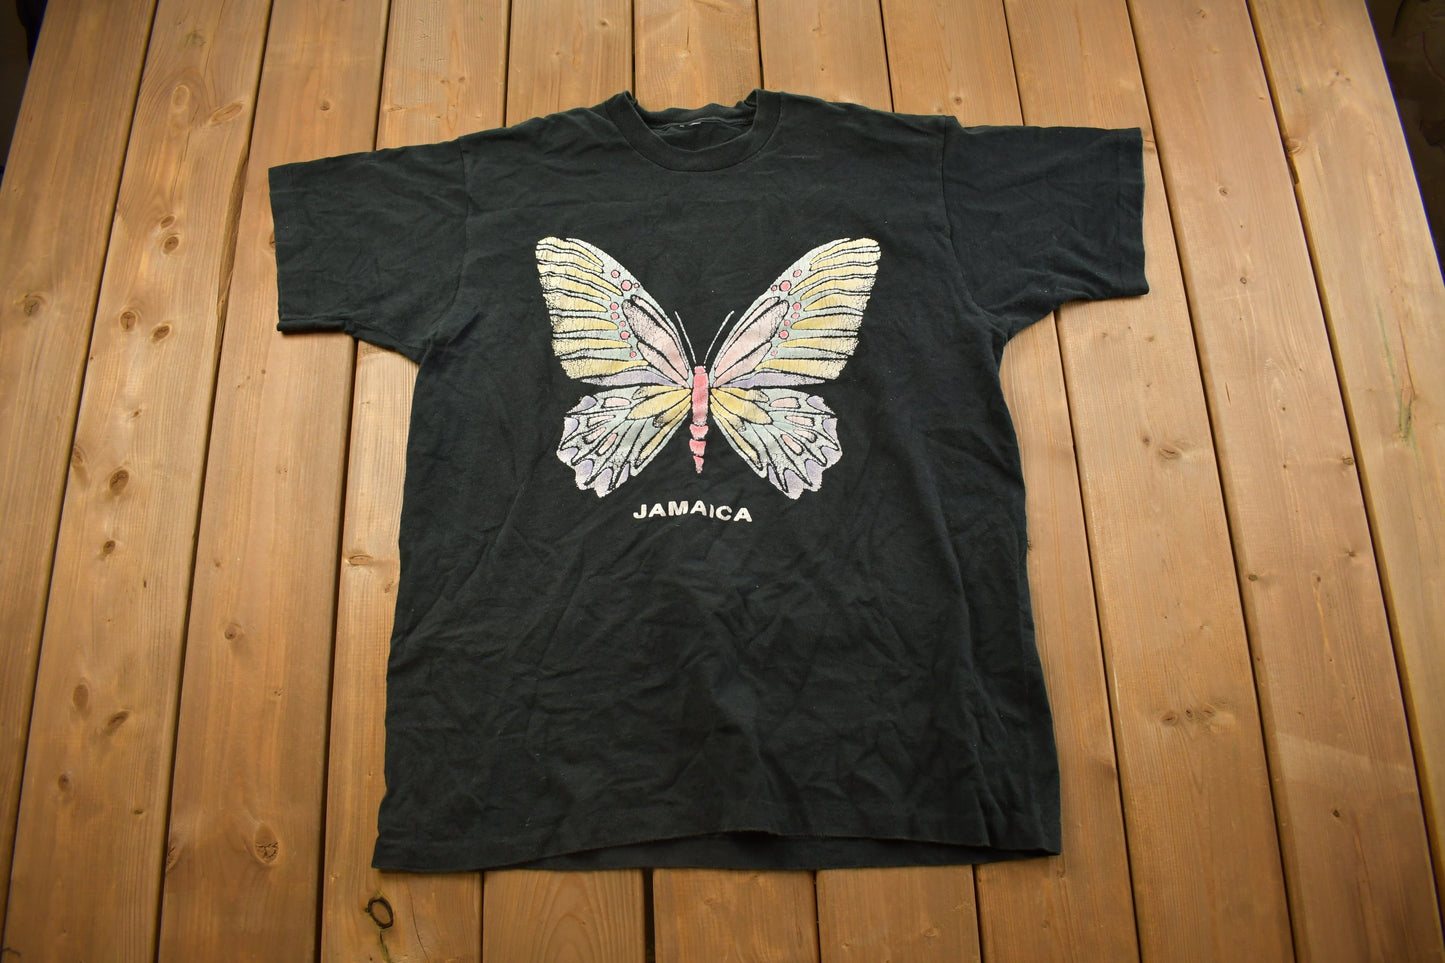 Vintage 1990s Jamaica Butterfly Travel T-Shirt  / 90s / Single Stitch /Streetwear Fashion / Made In USA / Vacation Tee / Travel & Tourism